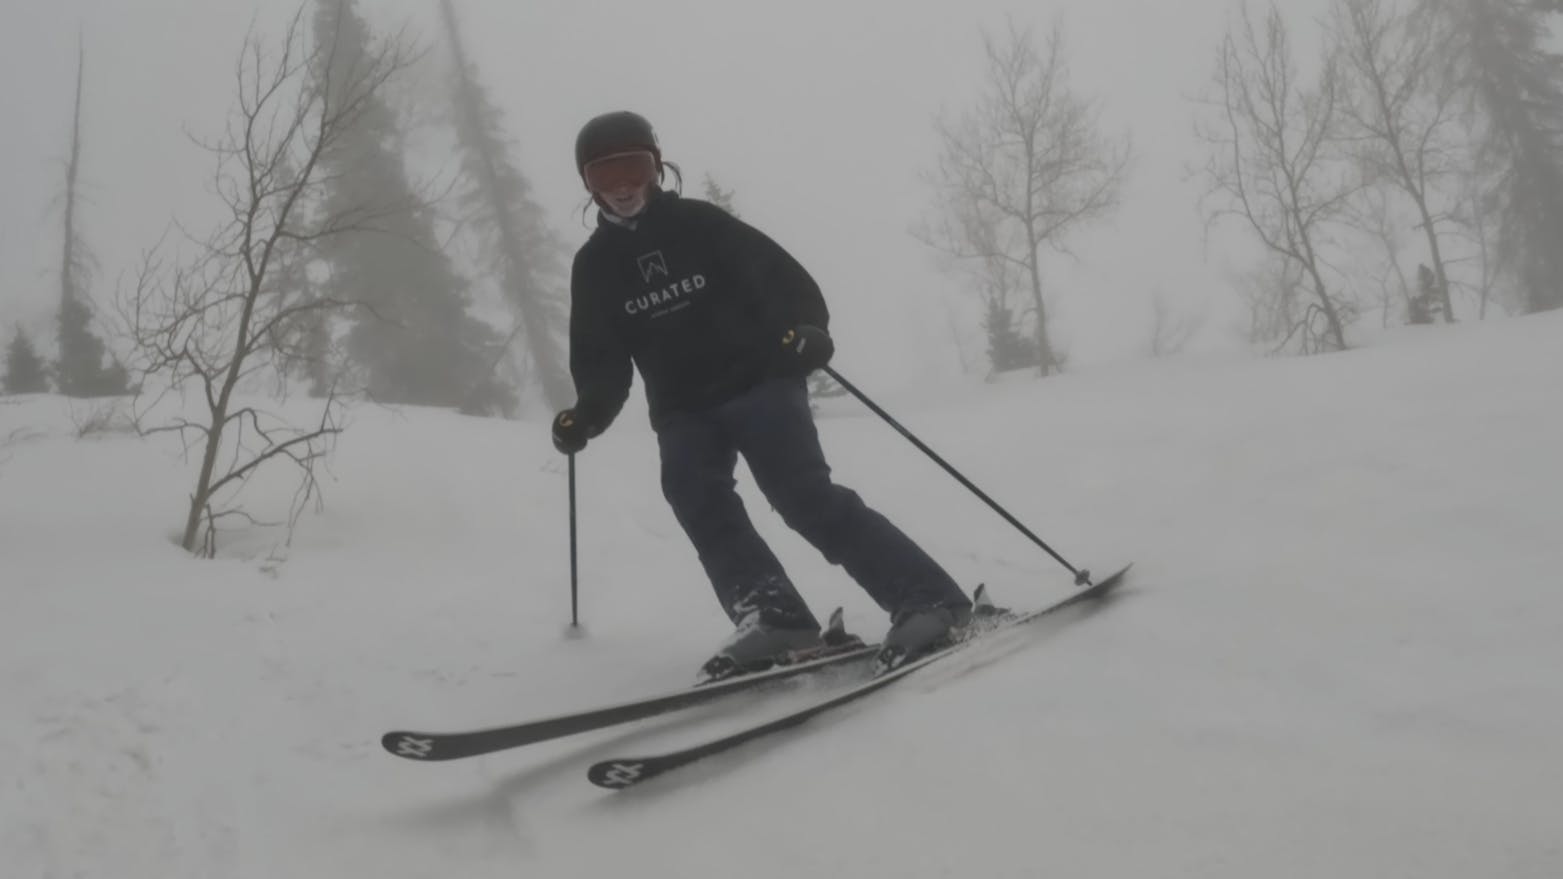 Curated Ski Expert Jessica Whittam on the 2023 Volkl Kenja 88 skis in foggy conditions